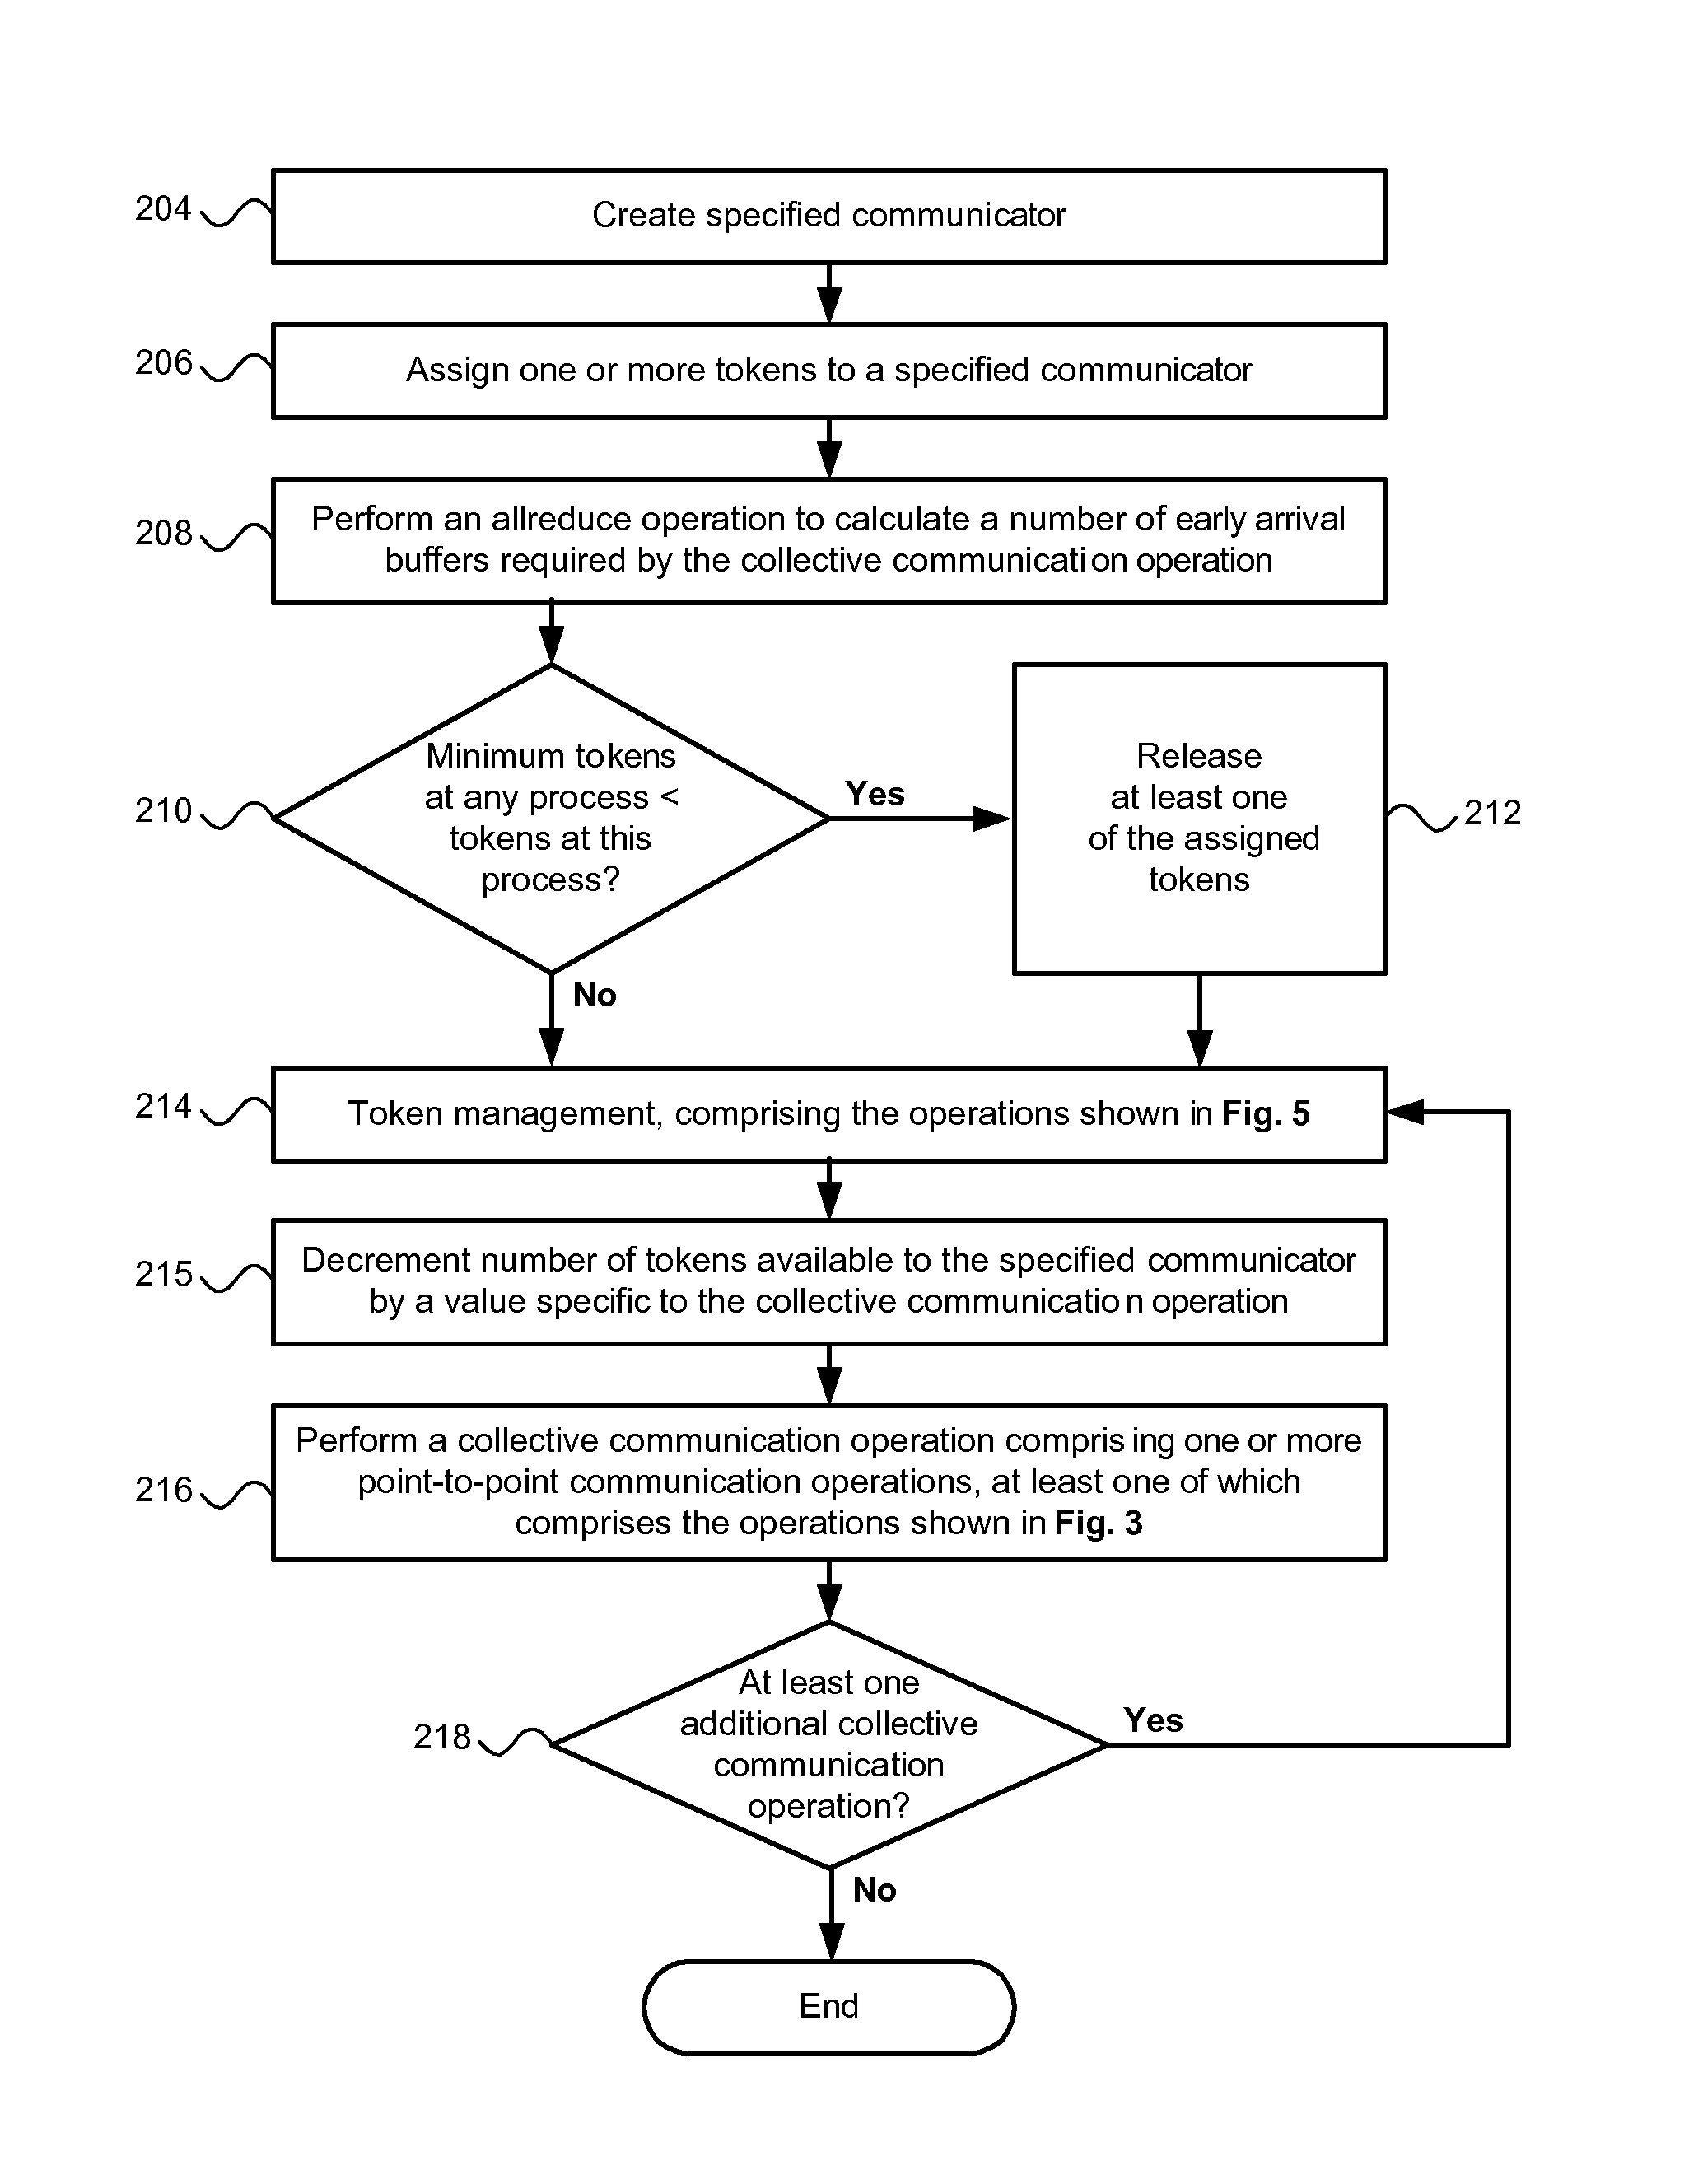 Communicator-based token/buffer management for eager protocol support in collective communication operations